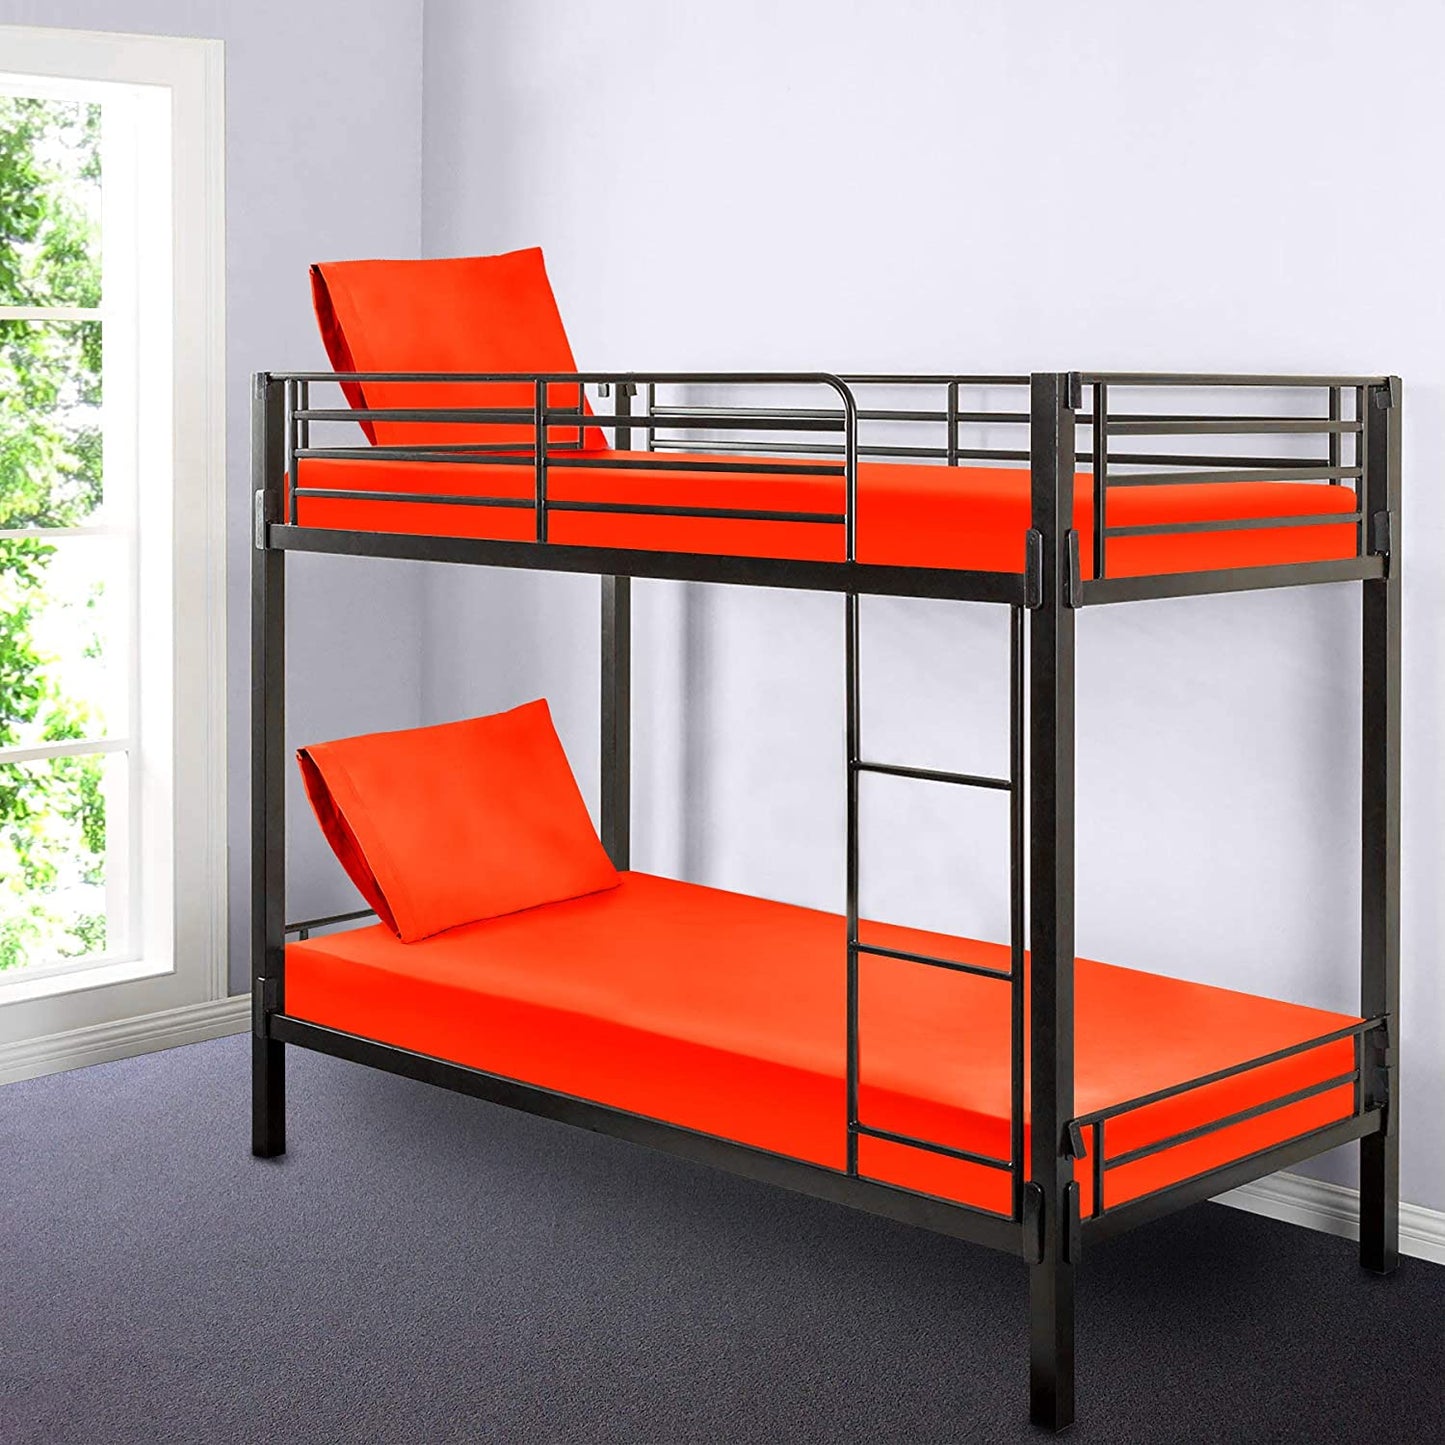 Gilbins 30" x 75" Cot Size 2-Piece Bed Sheet Set, Made of Ultra Soft Cotton, Perfect for Camp Bunk Beds/RVs/Guest Beds (Orange)